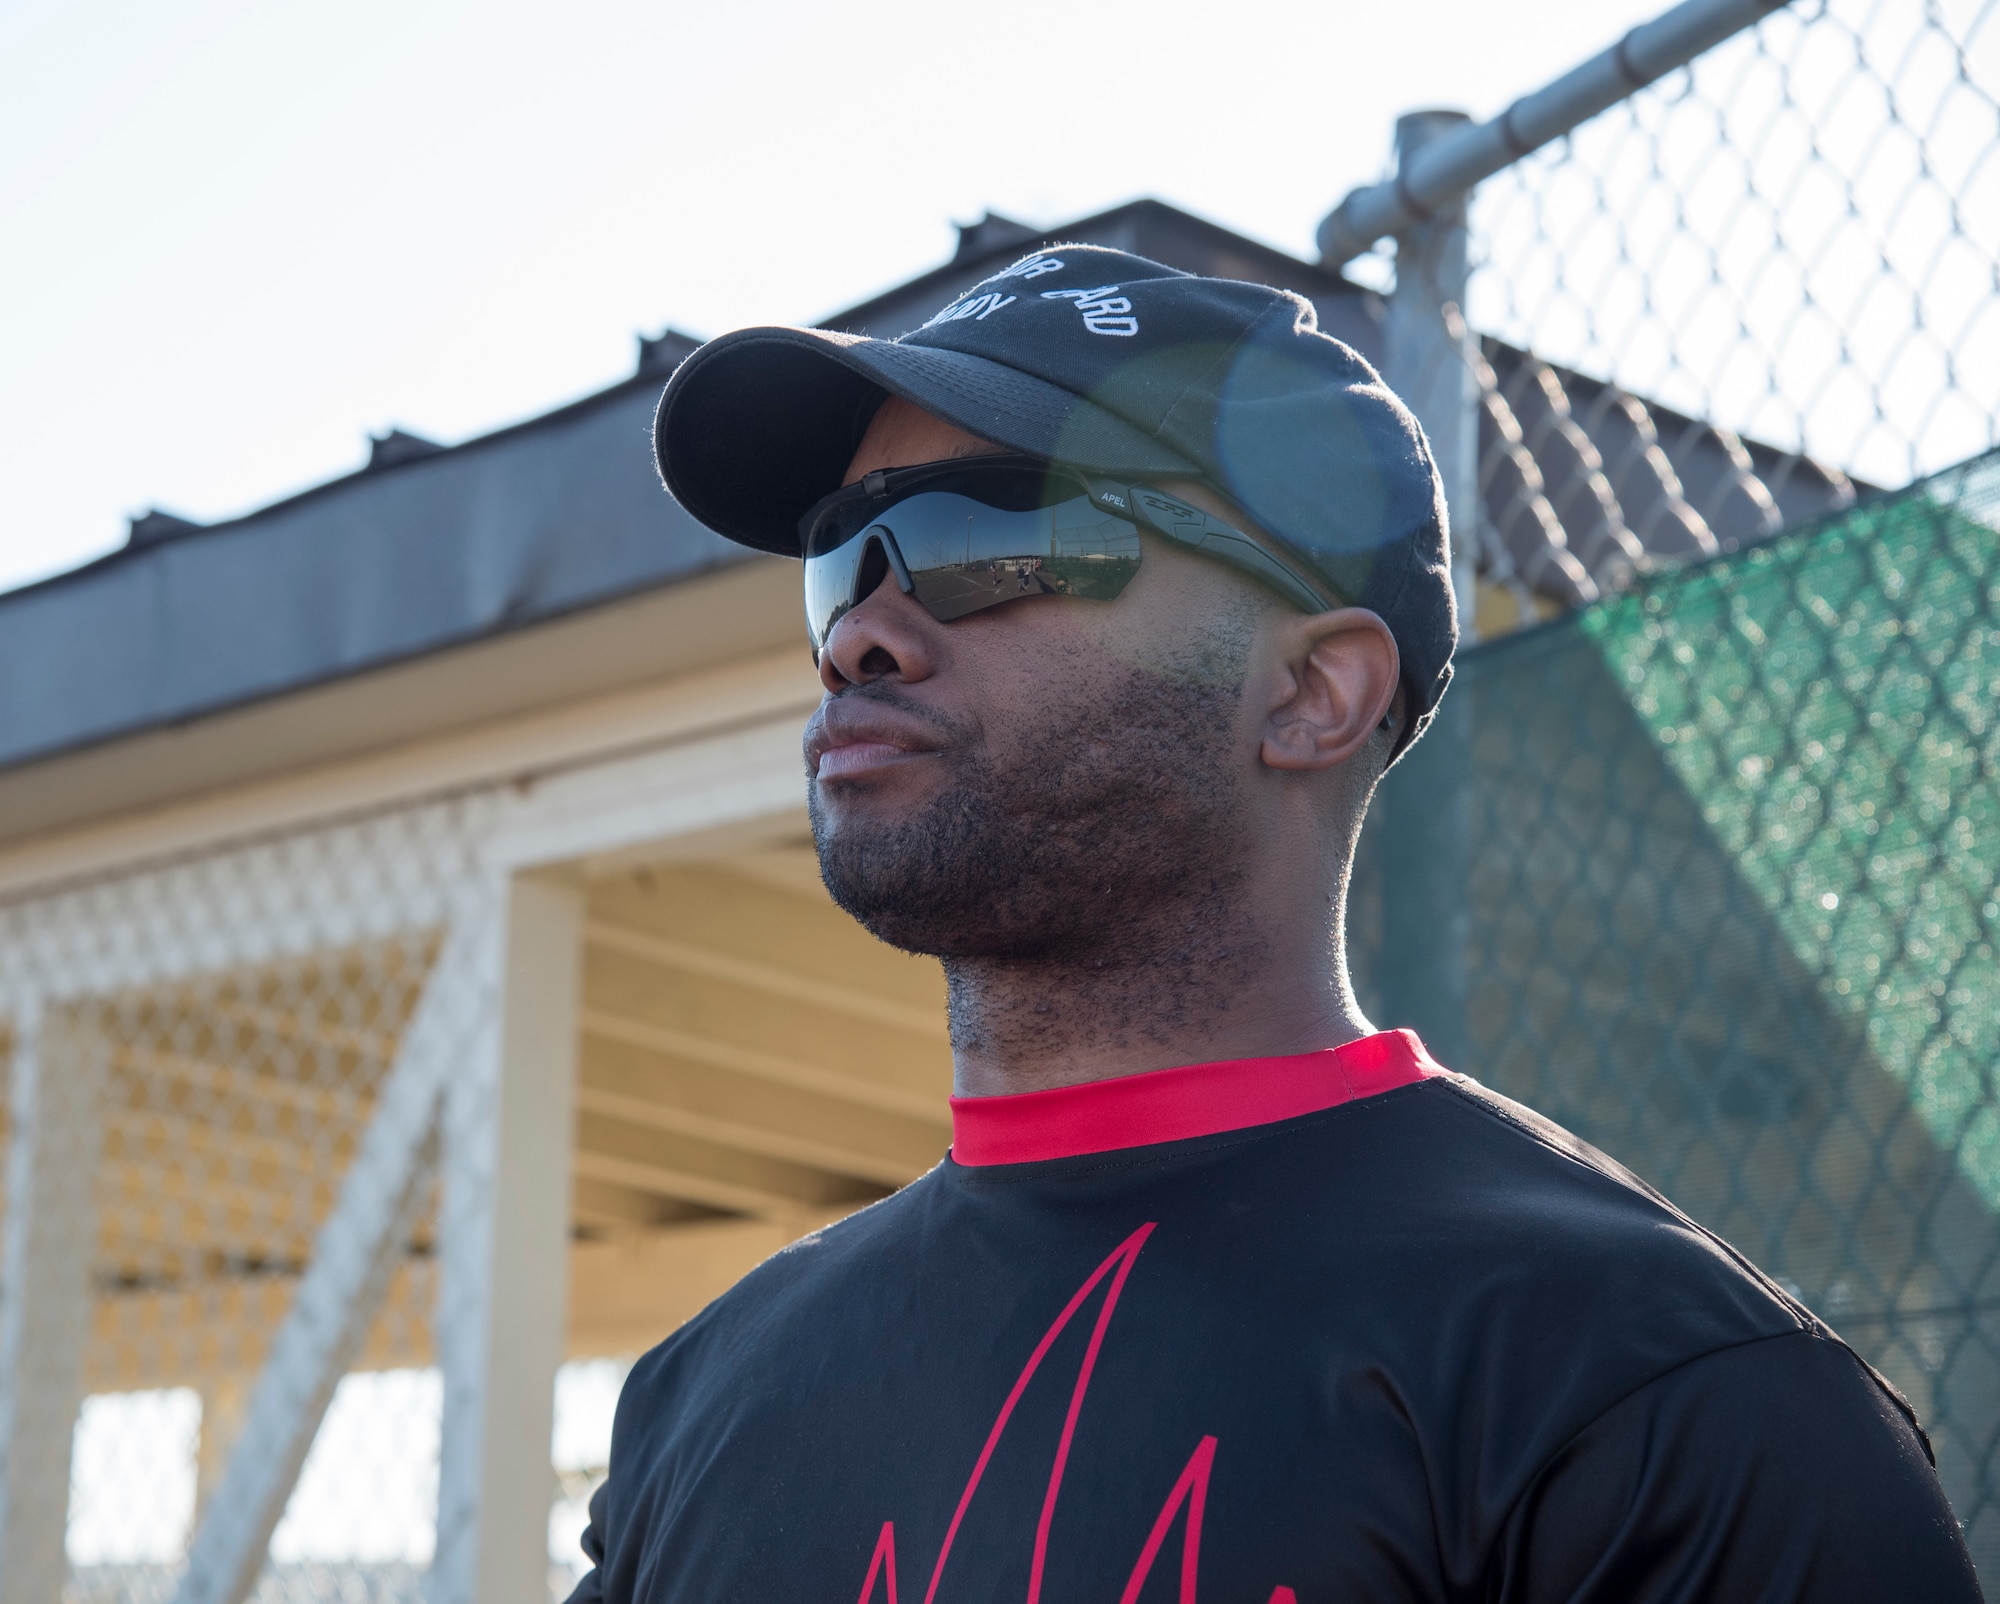 U.S. Air Force Master Sgt. Malcolm Sharpe, the 35th Medical Operations Squadron mental health clinic NCO in charge, keeps his eyes on a game during the 2019 Cinco de Mayo softball tournament at Misawa Air Base, Japan, May 4, 2019. The tournament is one of many sporting events held on Misawa AB, promoting teamwork and helping Airmen meet others on the base. (U.S. Air Force photo by Branden Yamada)